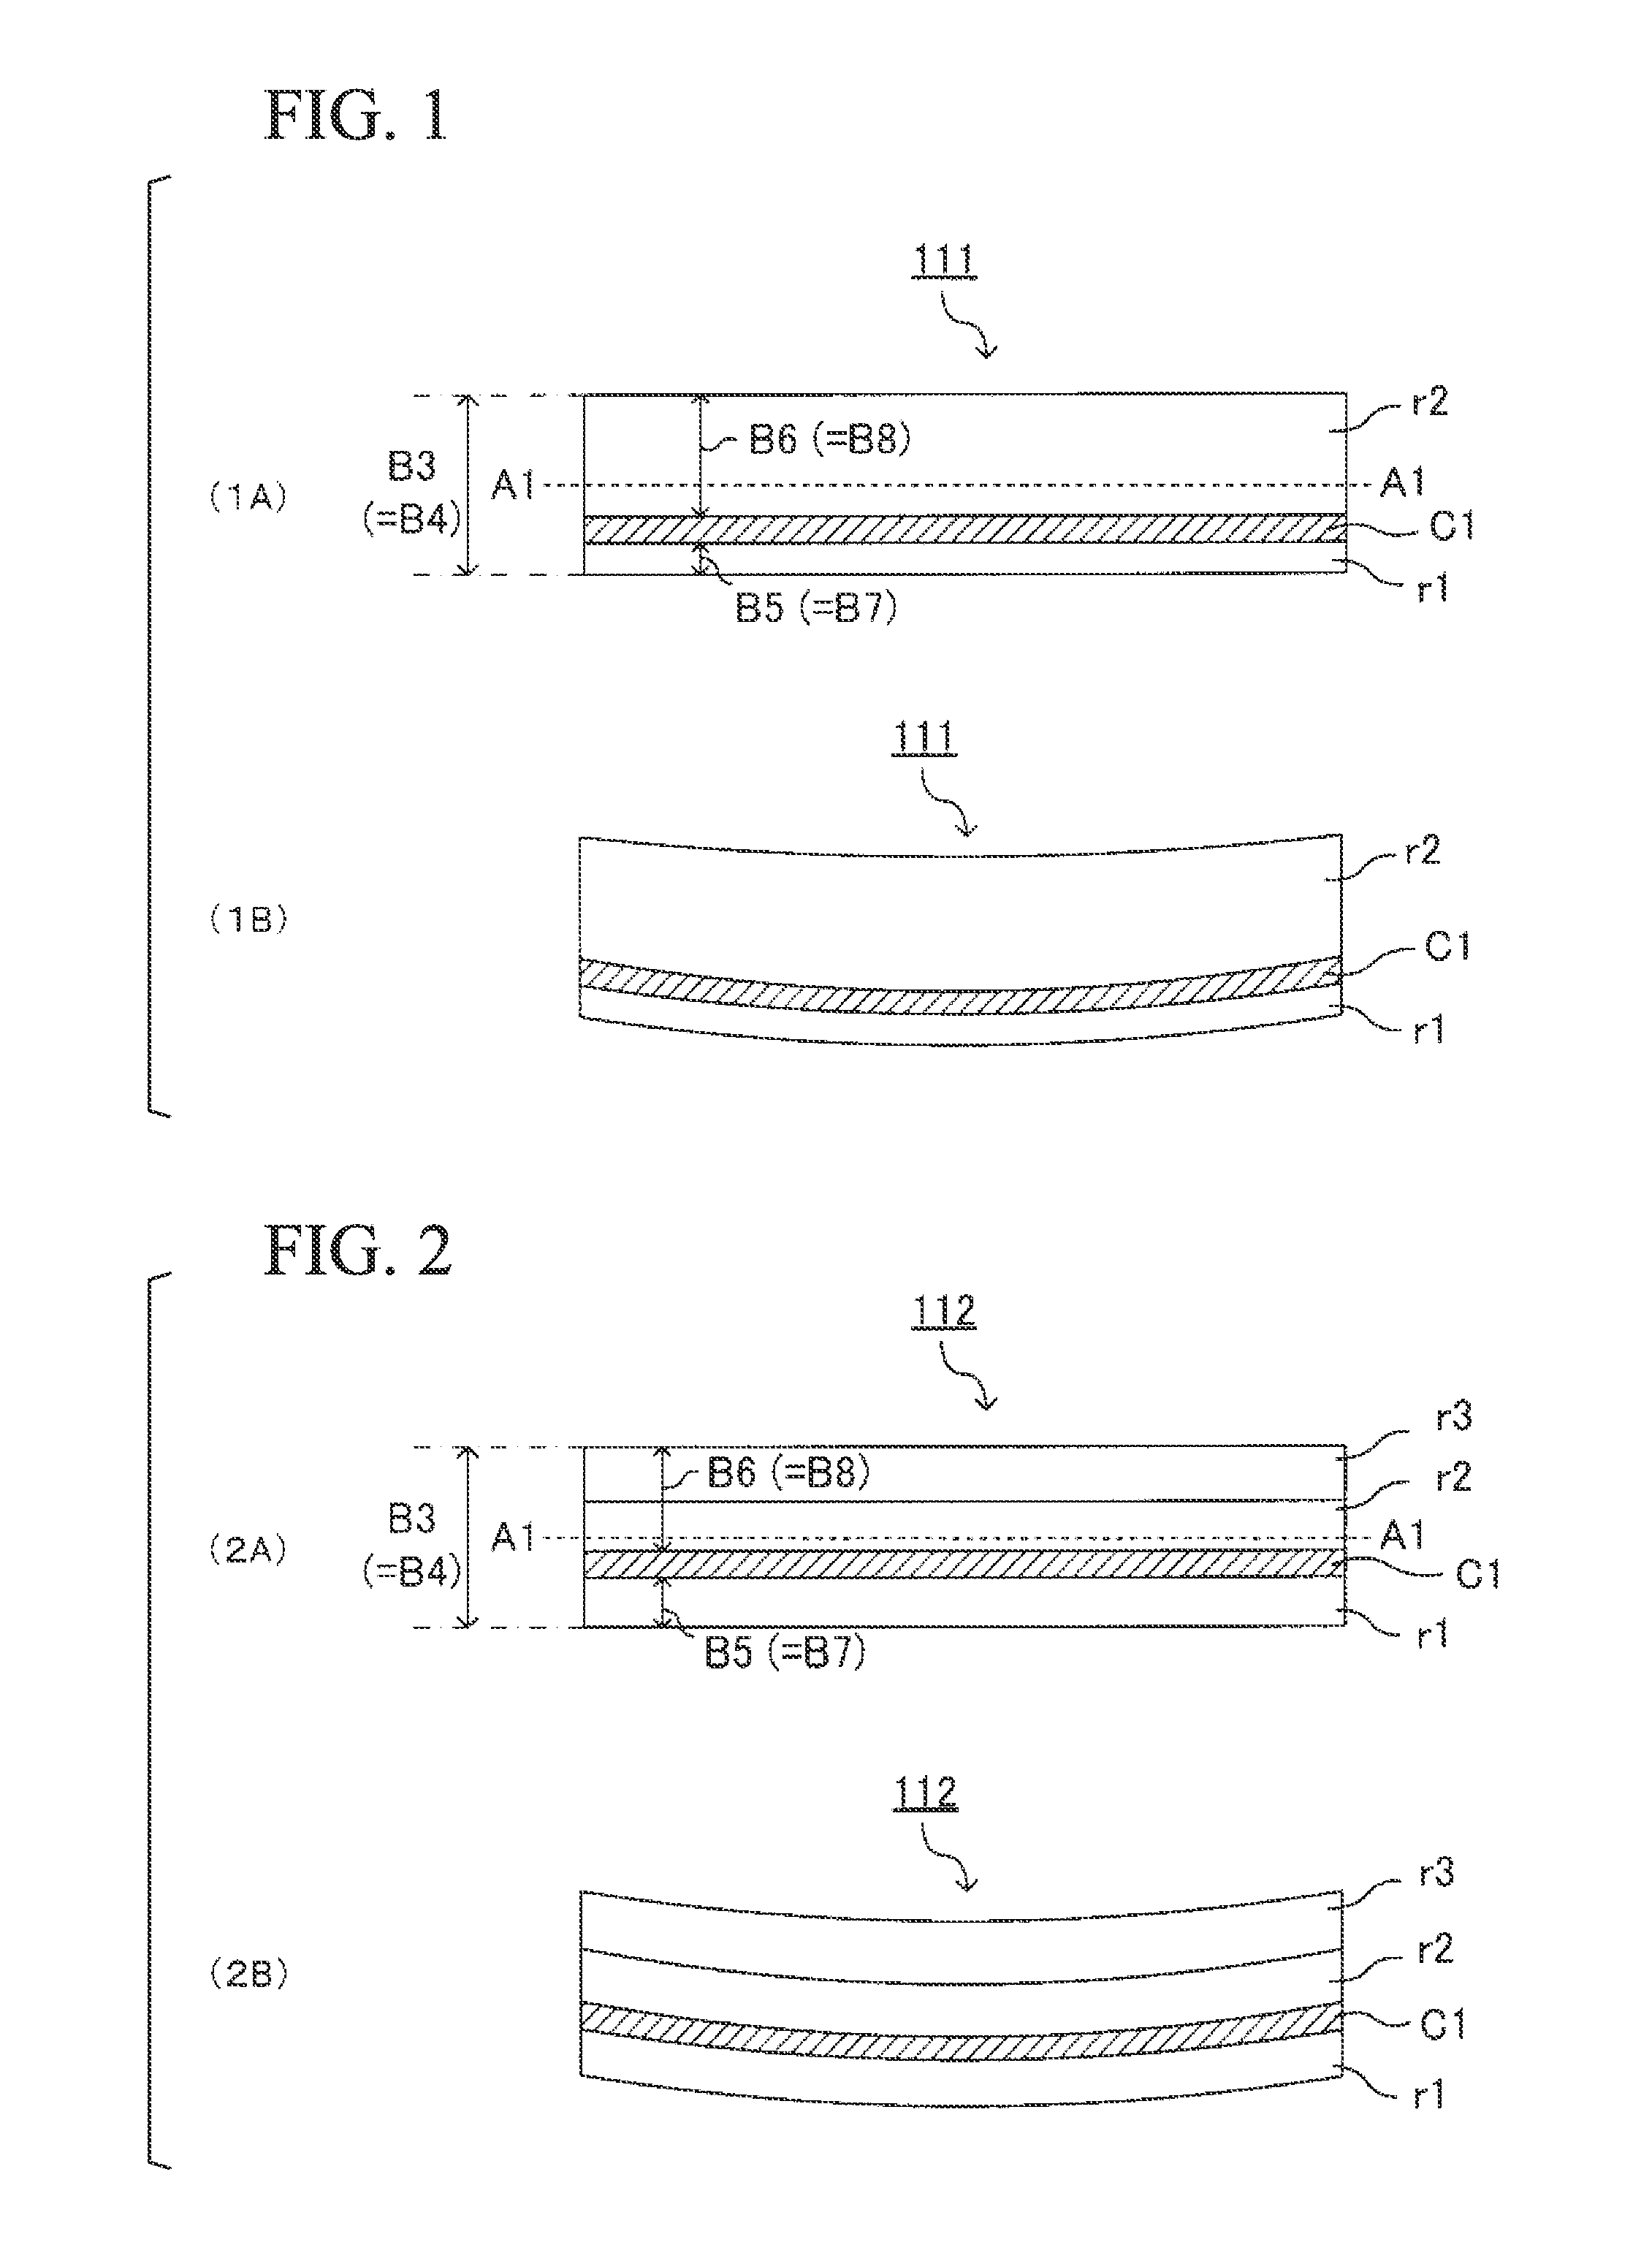 Insulating substrate, metal-clad laminate, printed wiring board and semiconductor device